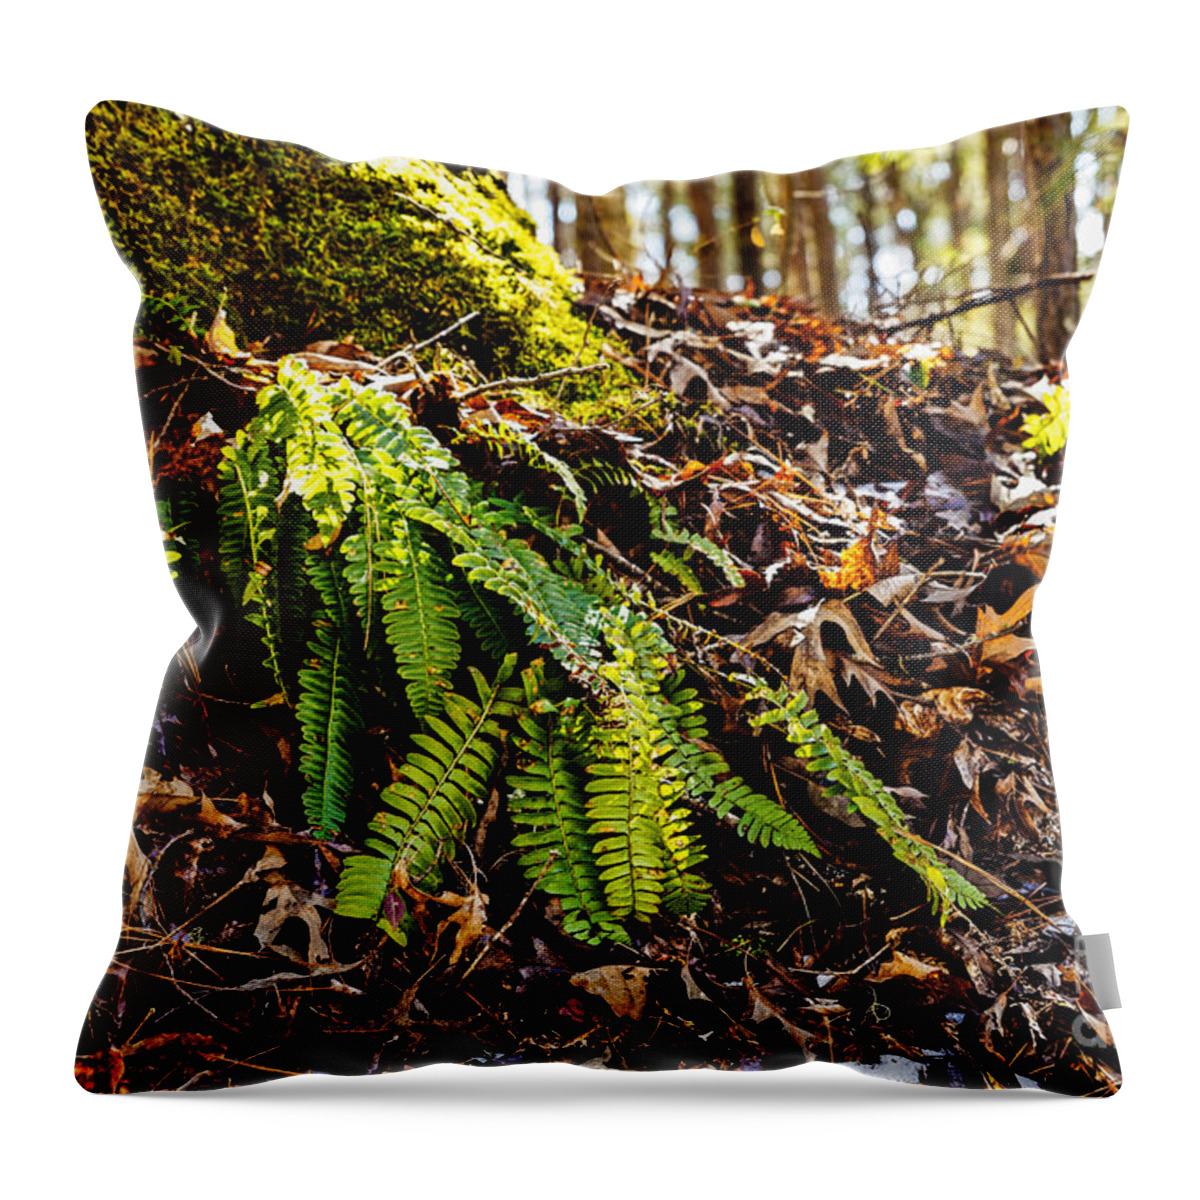 Polystichum Acrostichoides Throw Pillow featuring the photograph The Christmas Fern by Paul Mashburn